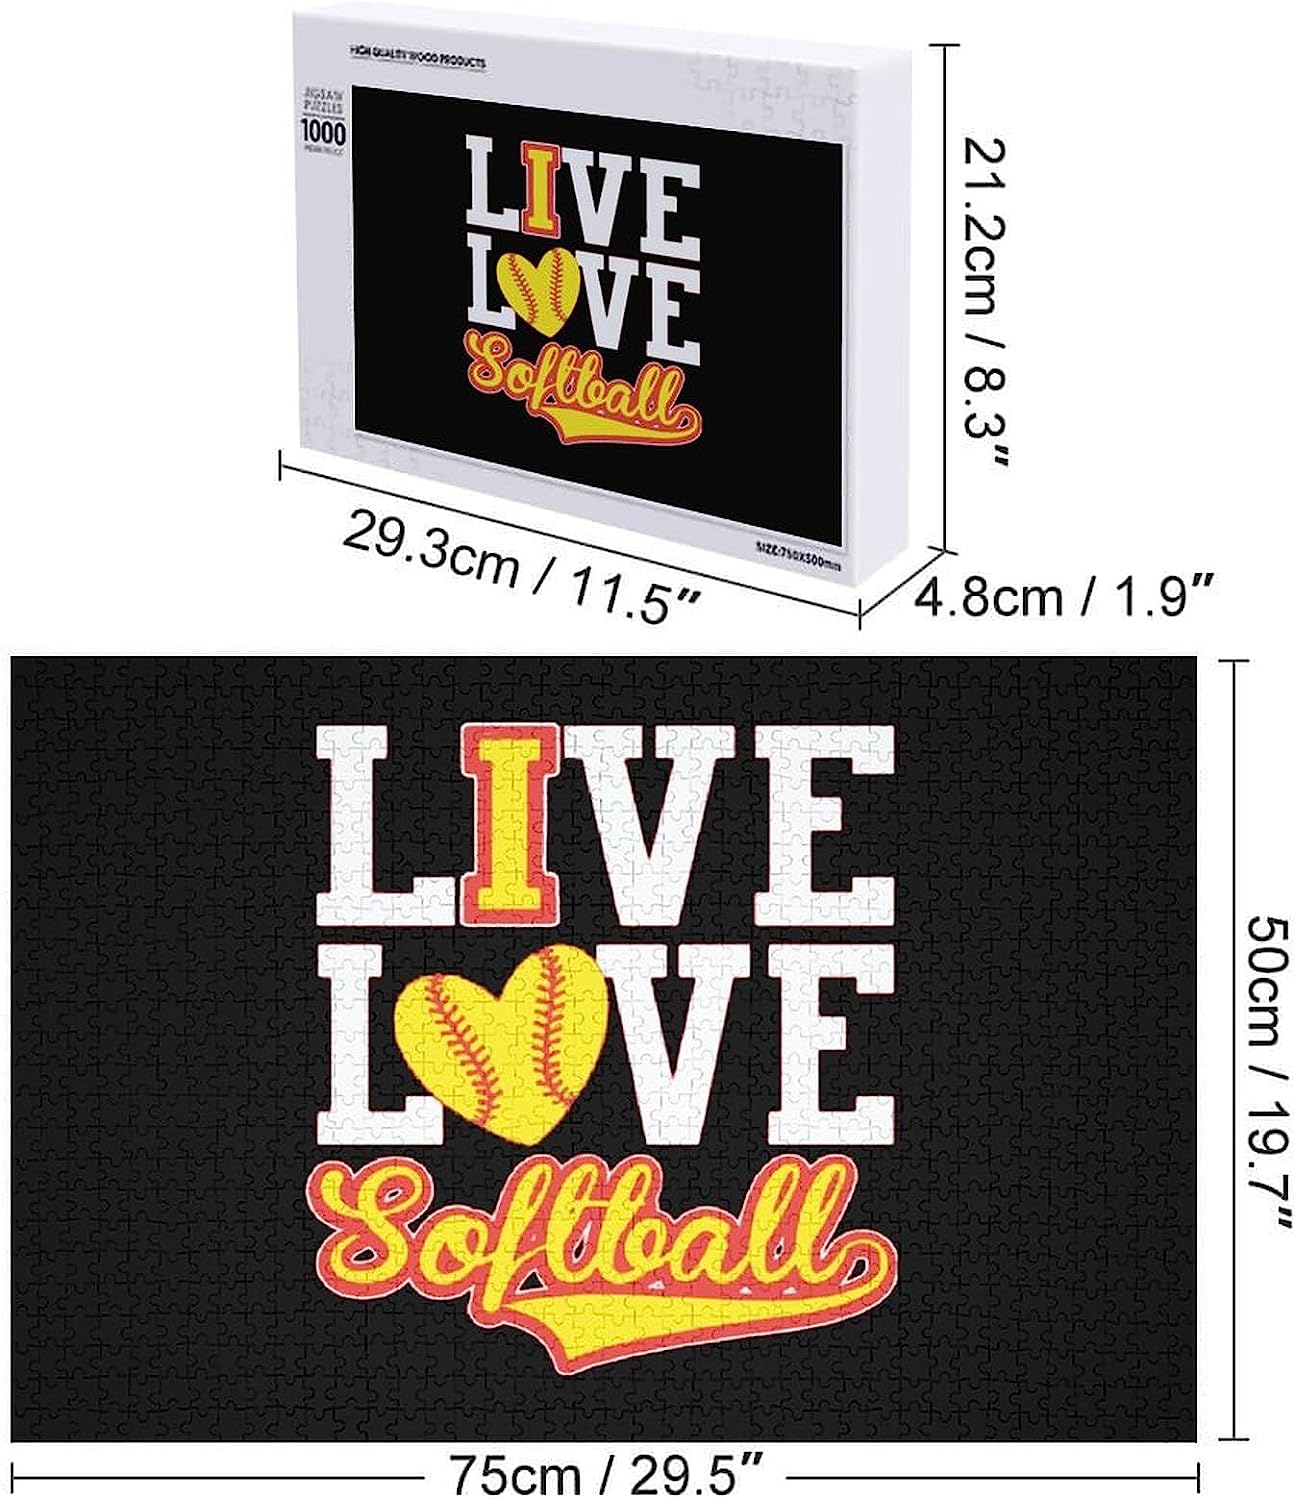 Live Love Softball Puzzles for Adults Wooden Jigsaw Puzzle Funny Leisure Toy Gifts for Family Friends